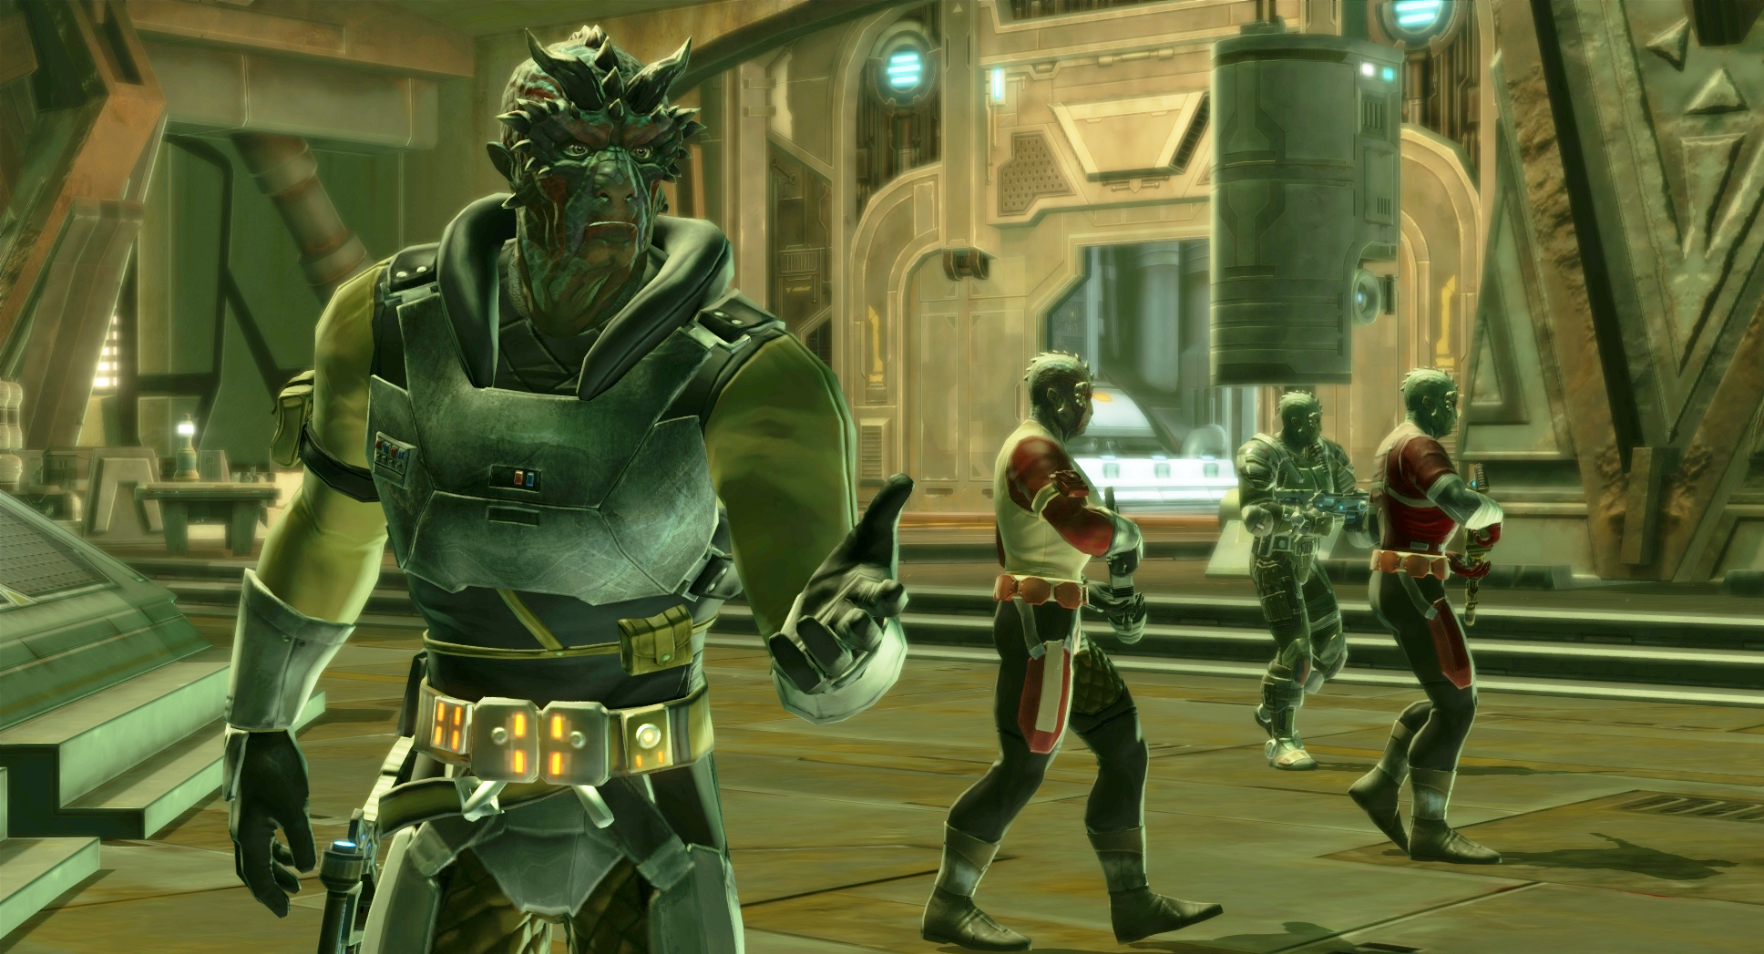 swtor kotfe profitandplunder negotiatingwithpirates Star Wars: The Old Republic - Knights of the Fallen Empire "Profit and Plunder" Released